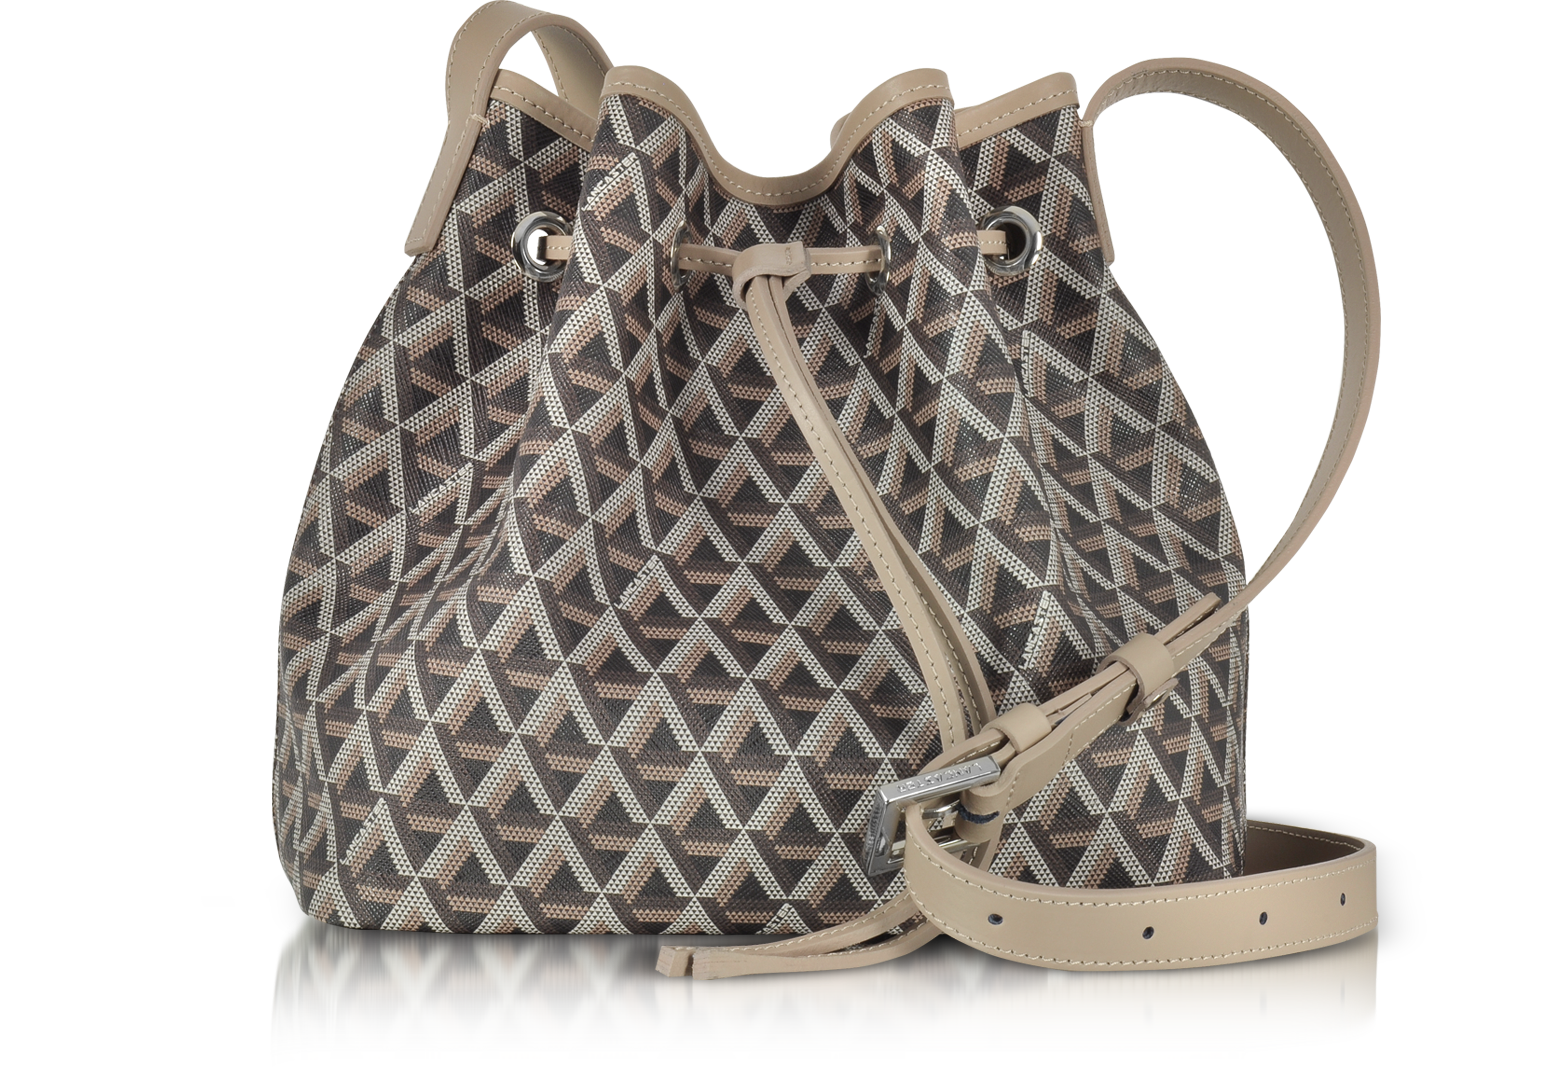 Lancaster Paris Ikon Brown & Nude Coated Canvas and Leather Small Bucket Bag at FORZIERI Australia